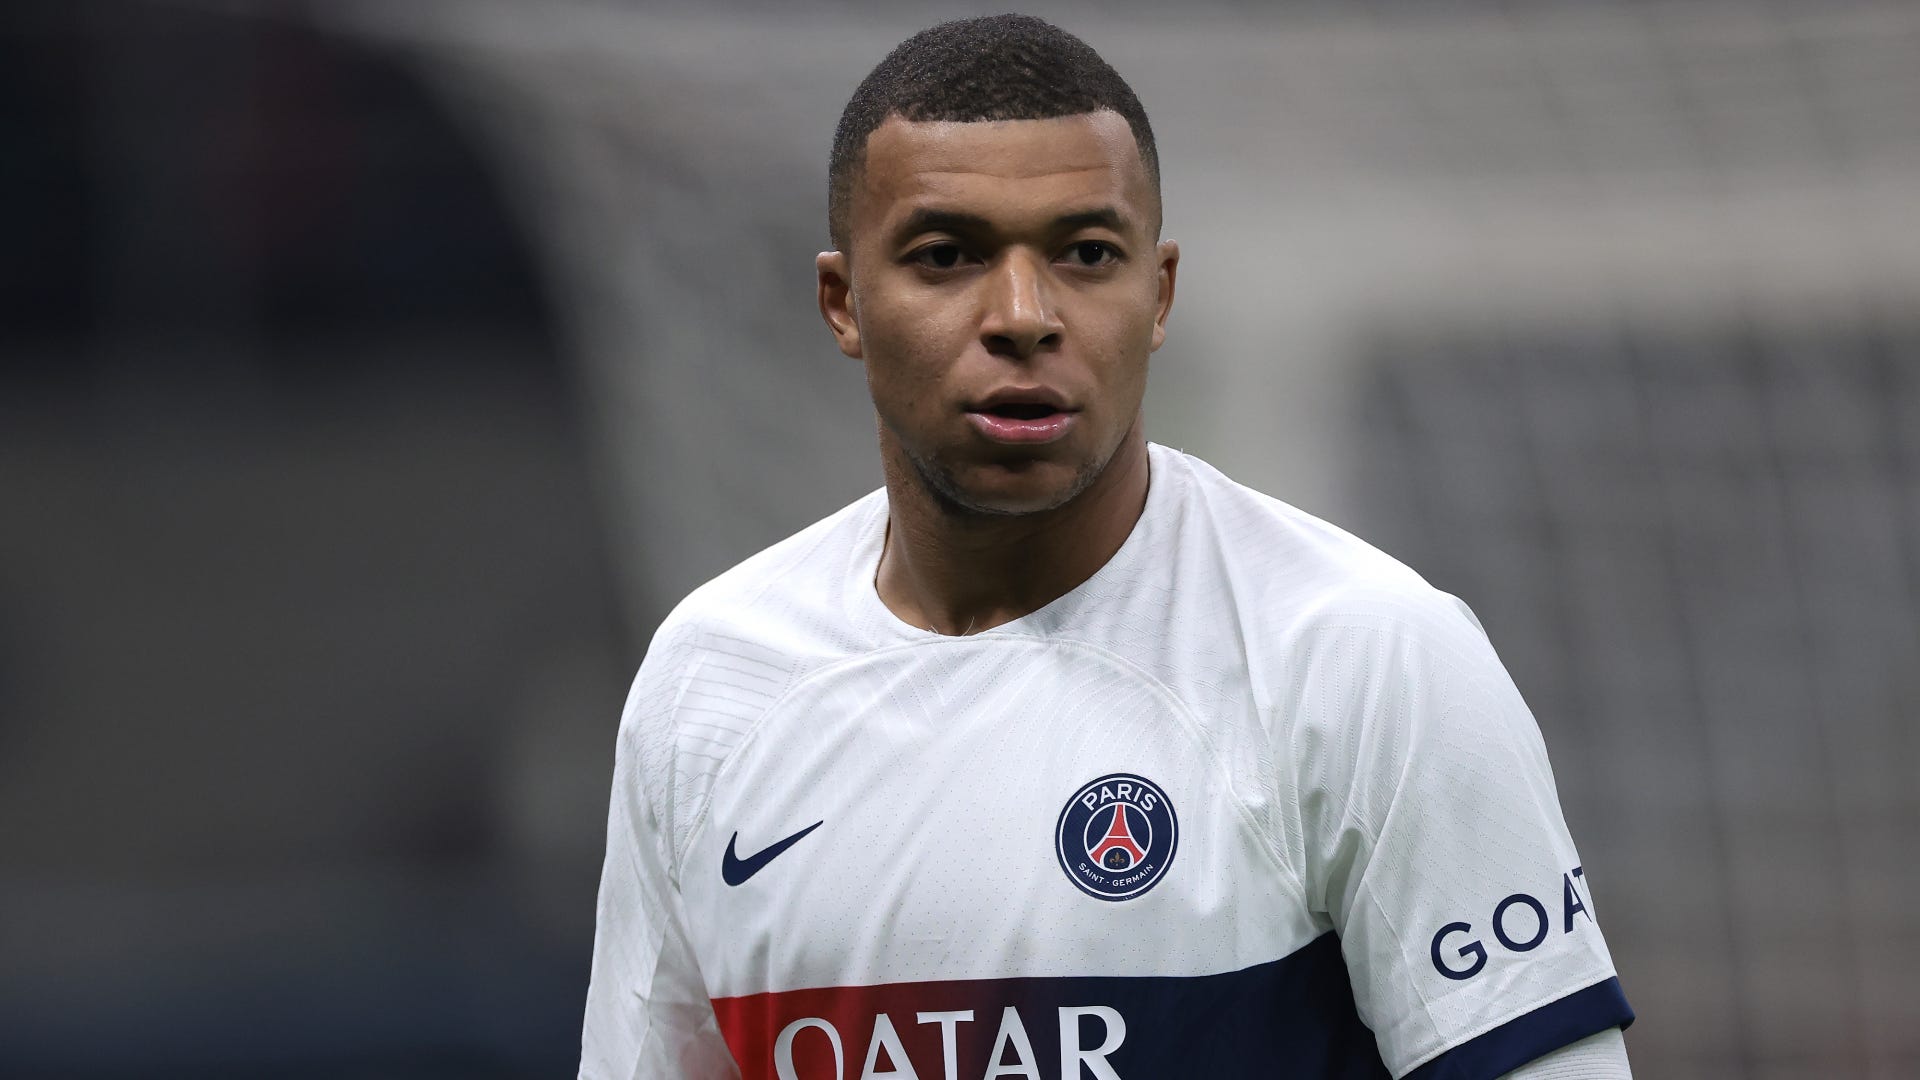 Last call for Kylian Mbappe! Real Madrid to send PSG forward final take-it-or-leave-it offer in January to land Frenchman on free transfer in summer of 2024